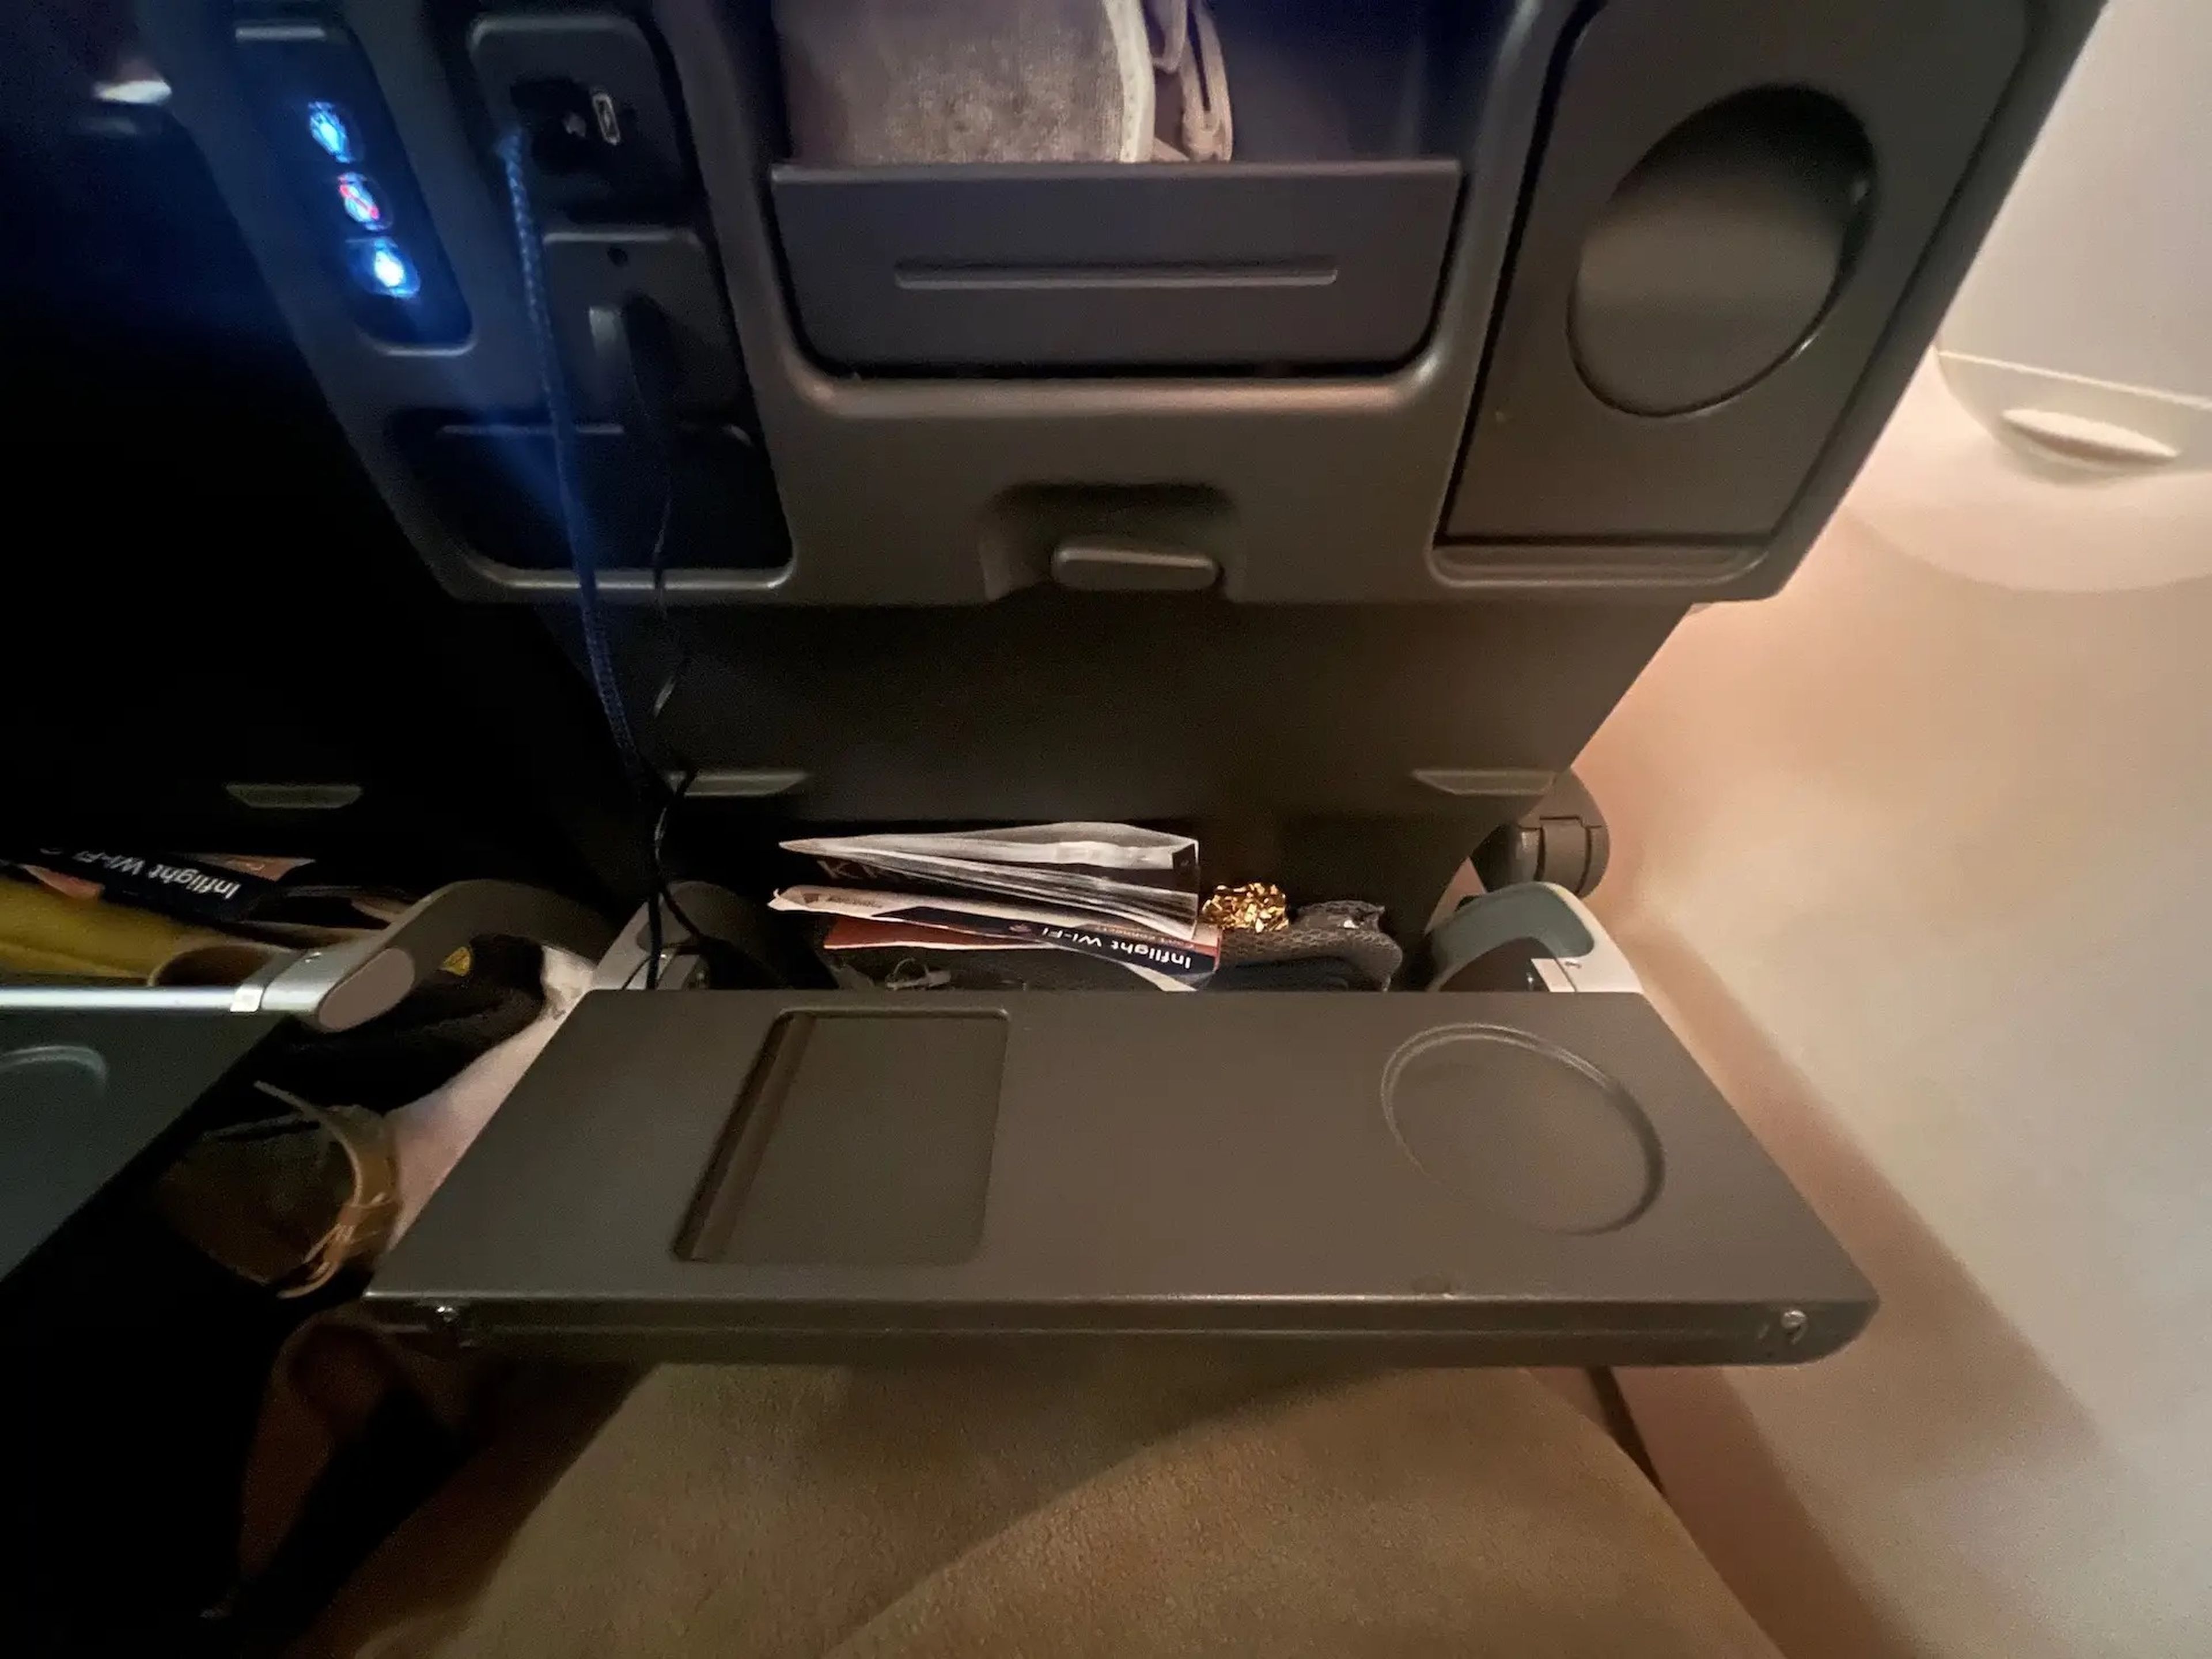 My tray table folded in half with the cupholder and mirror.